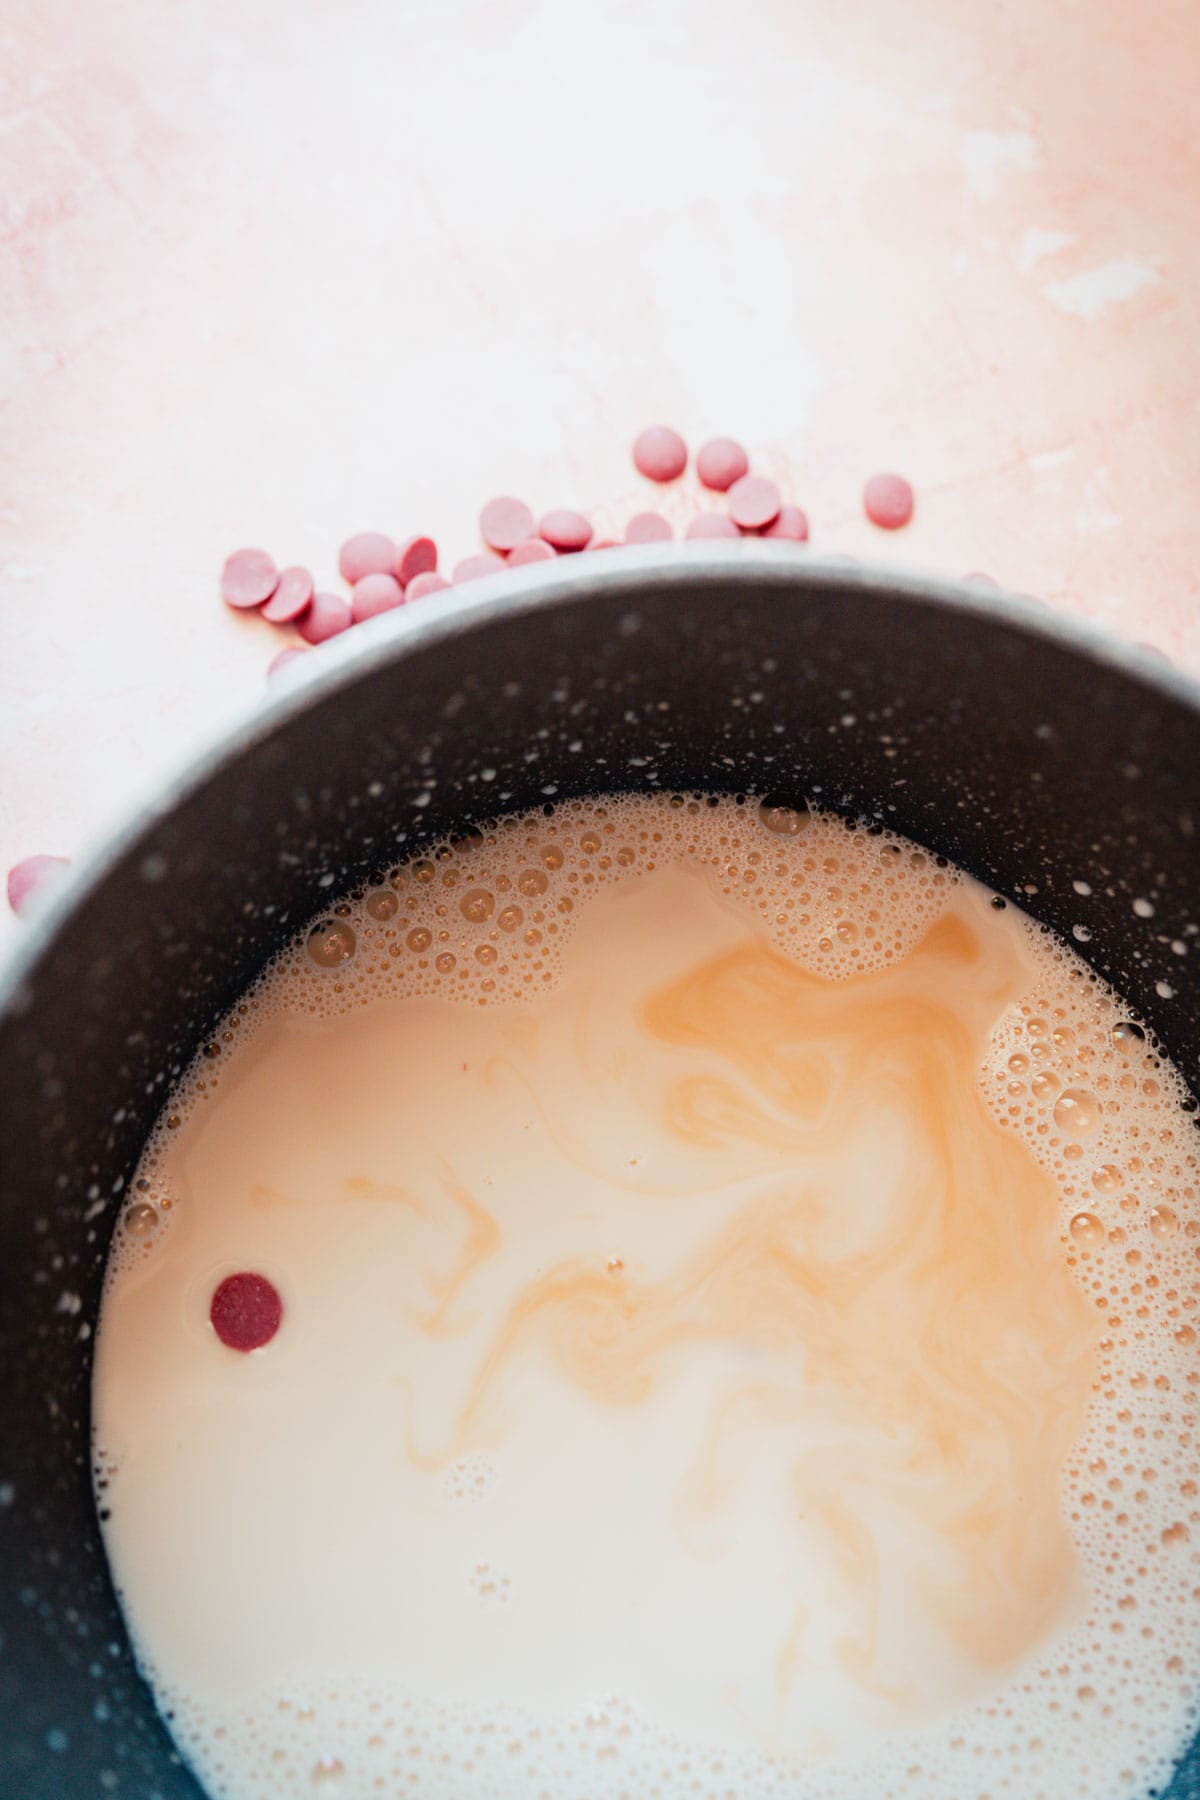 A dark gray saucepan filled with white milk and pink chocolate chips.